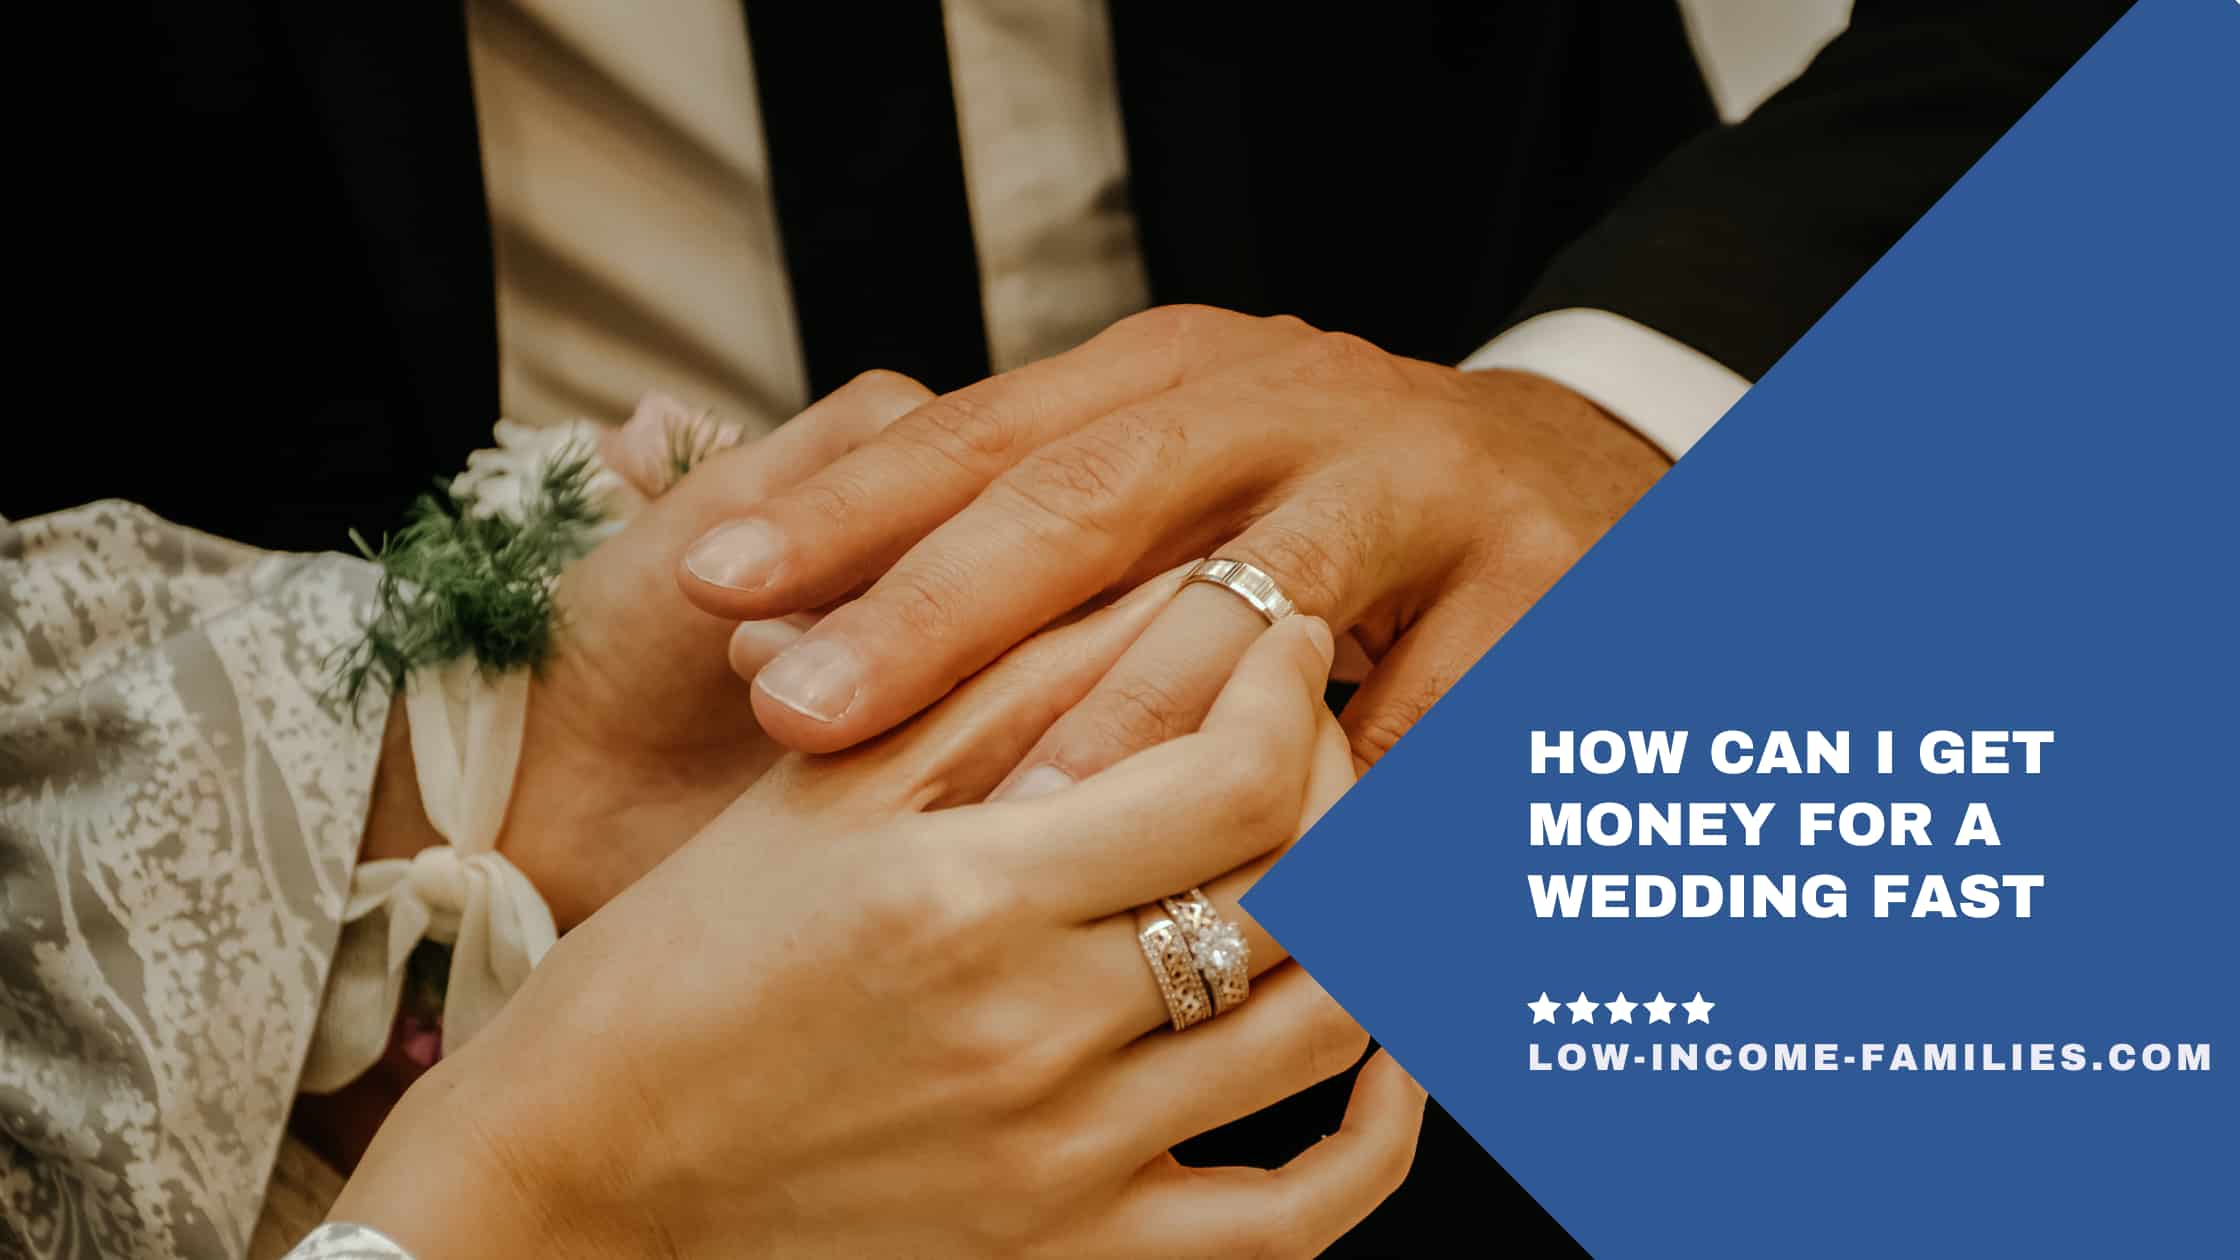 How Can I Get Money for a Wedding Fast?